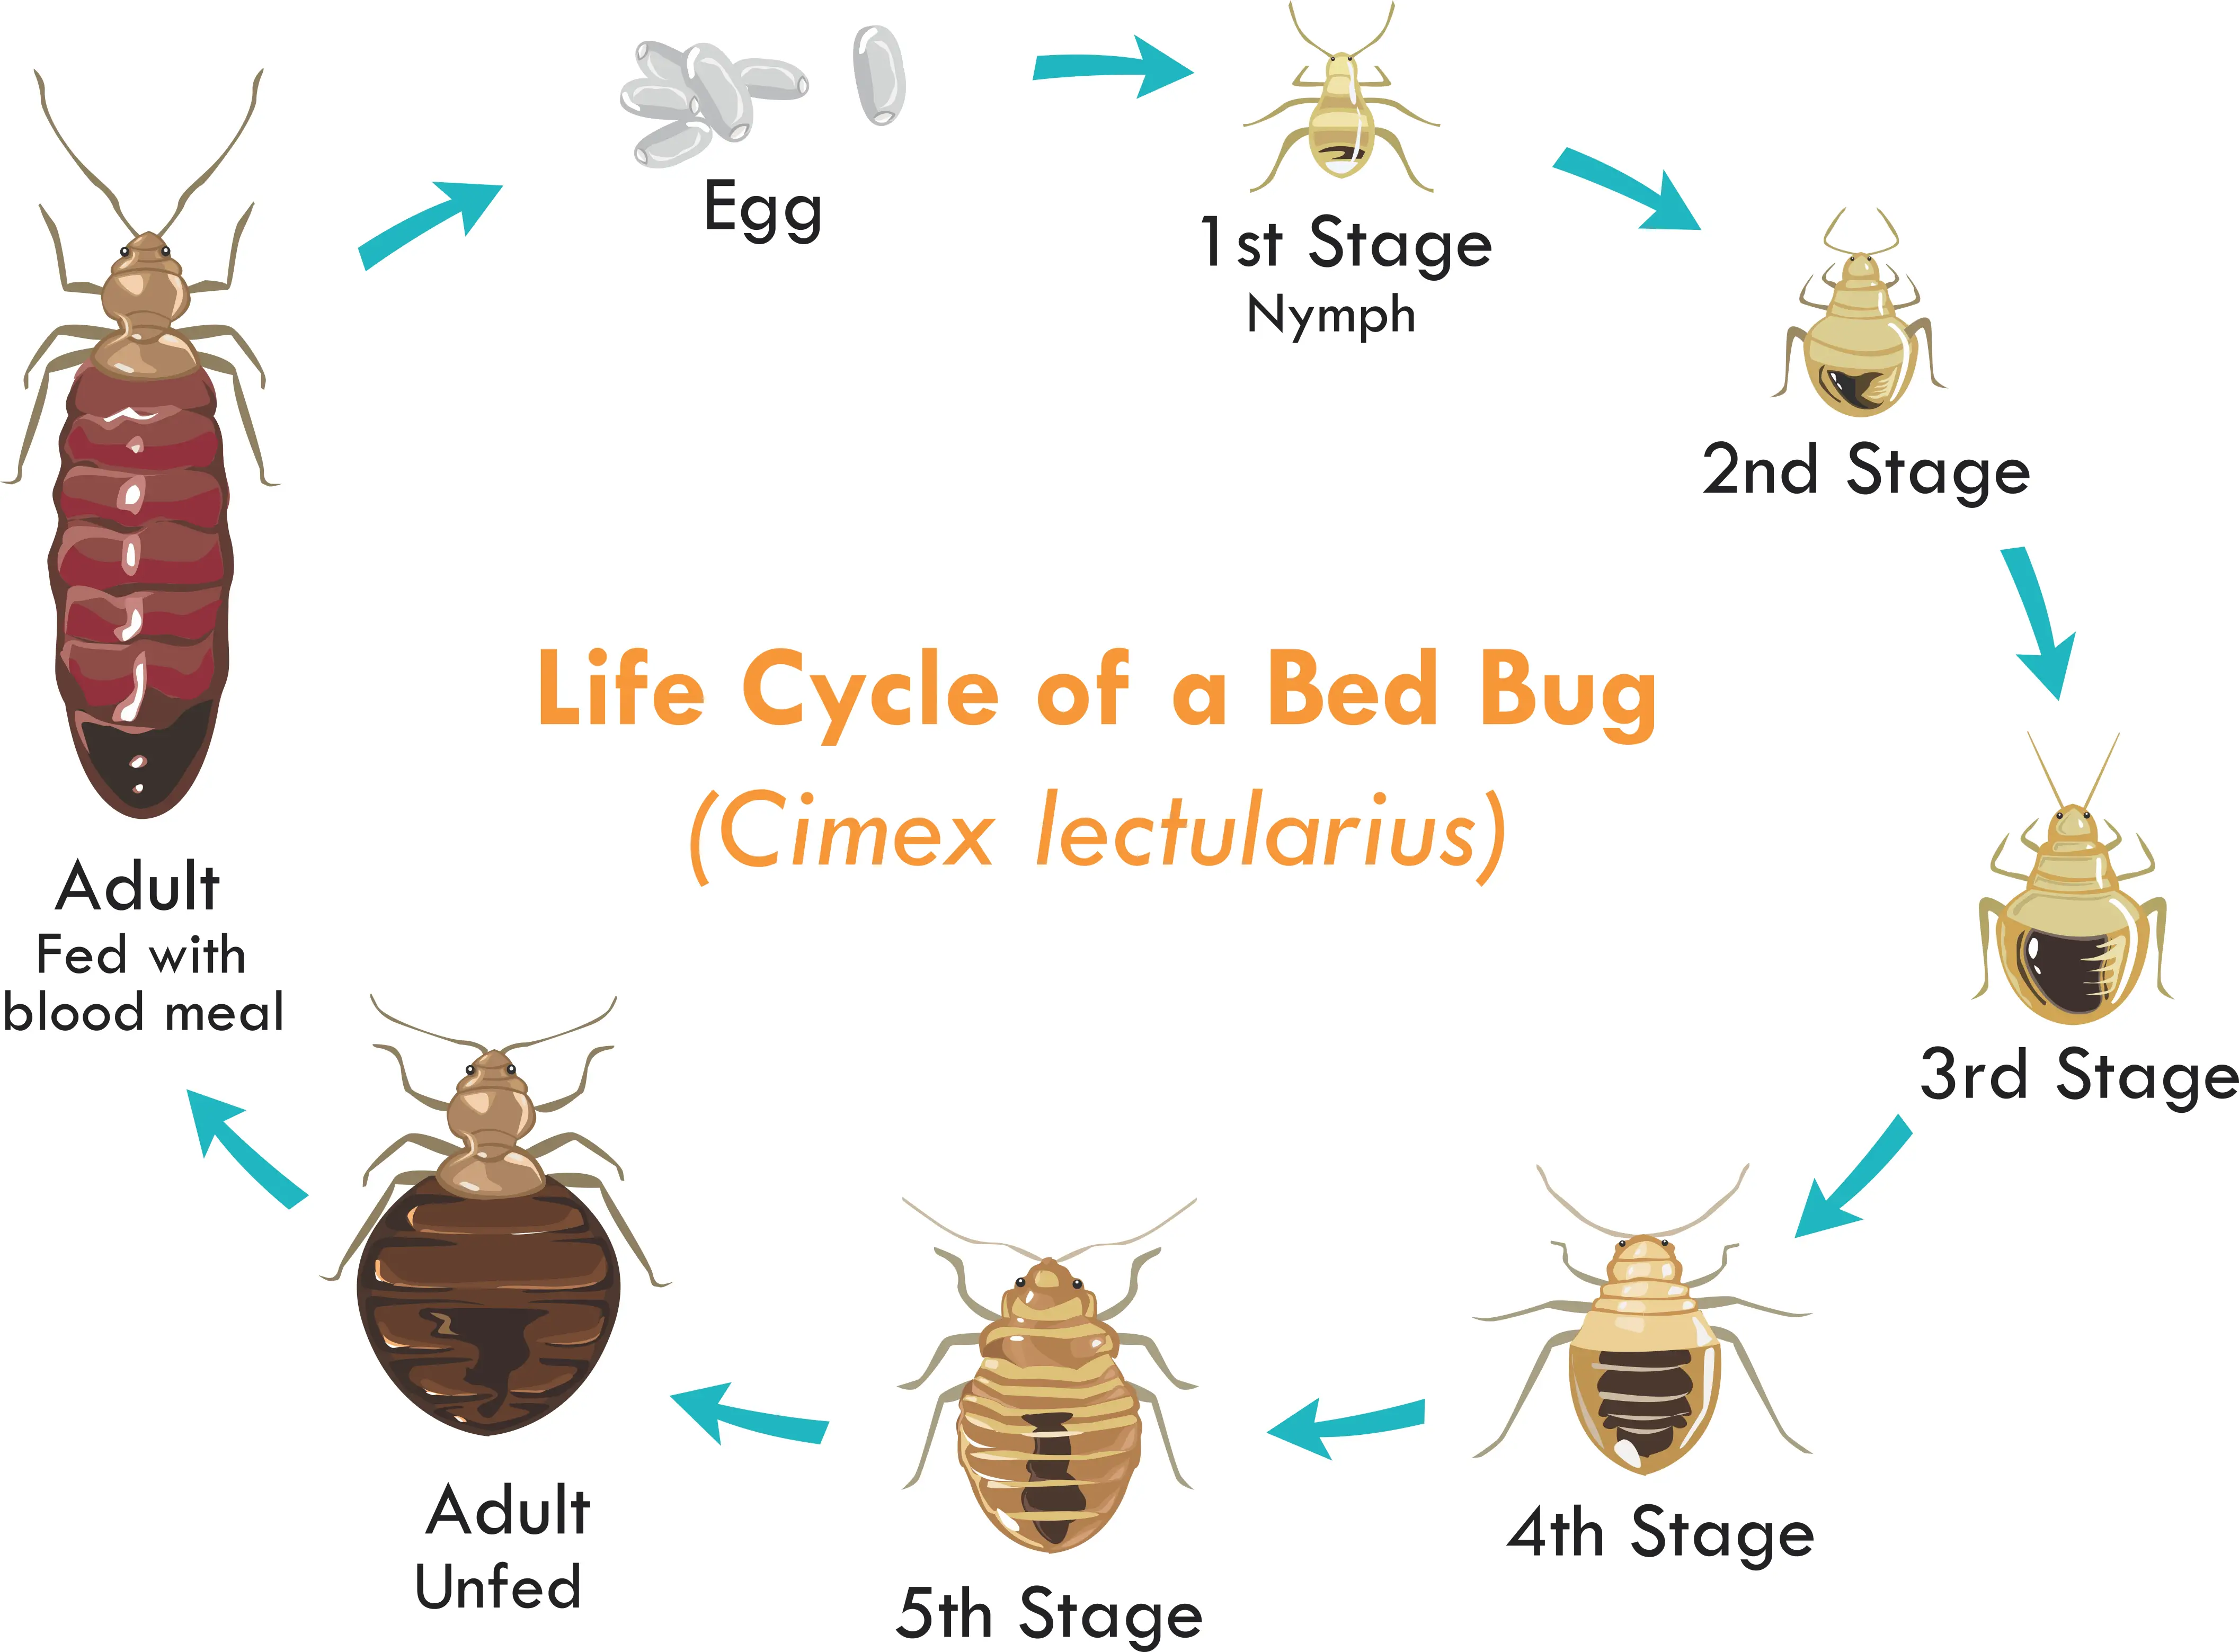 Is Bed Bugs Bites Contagious?